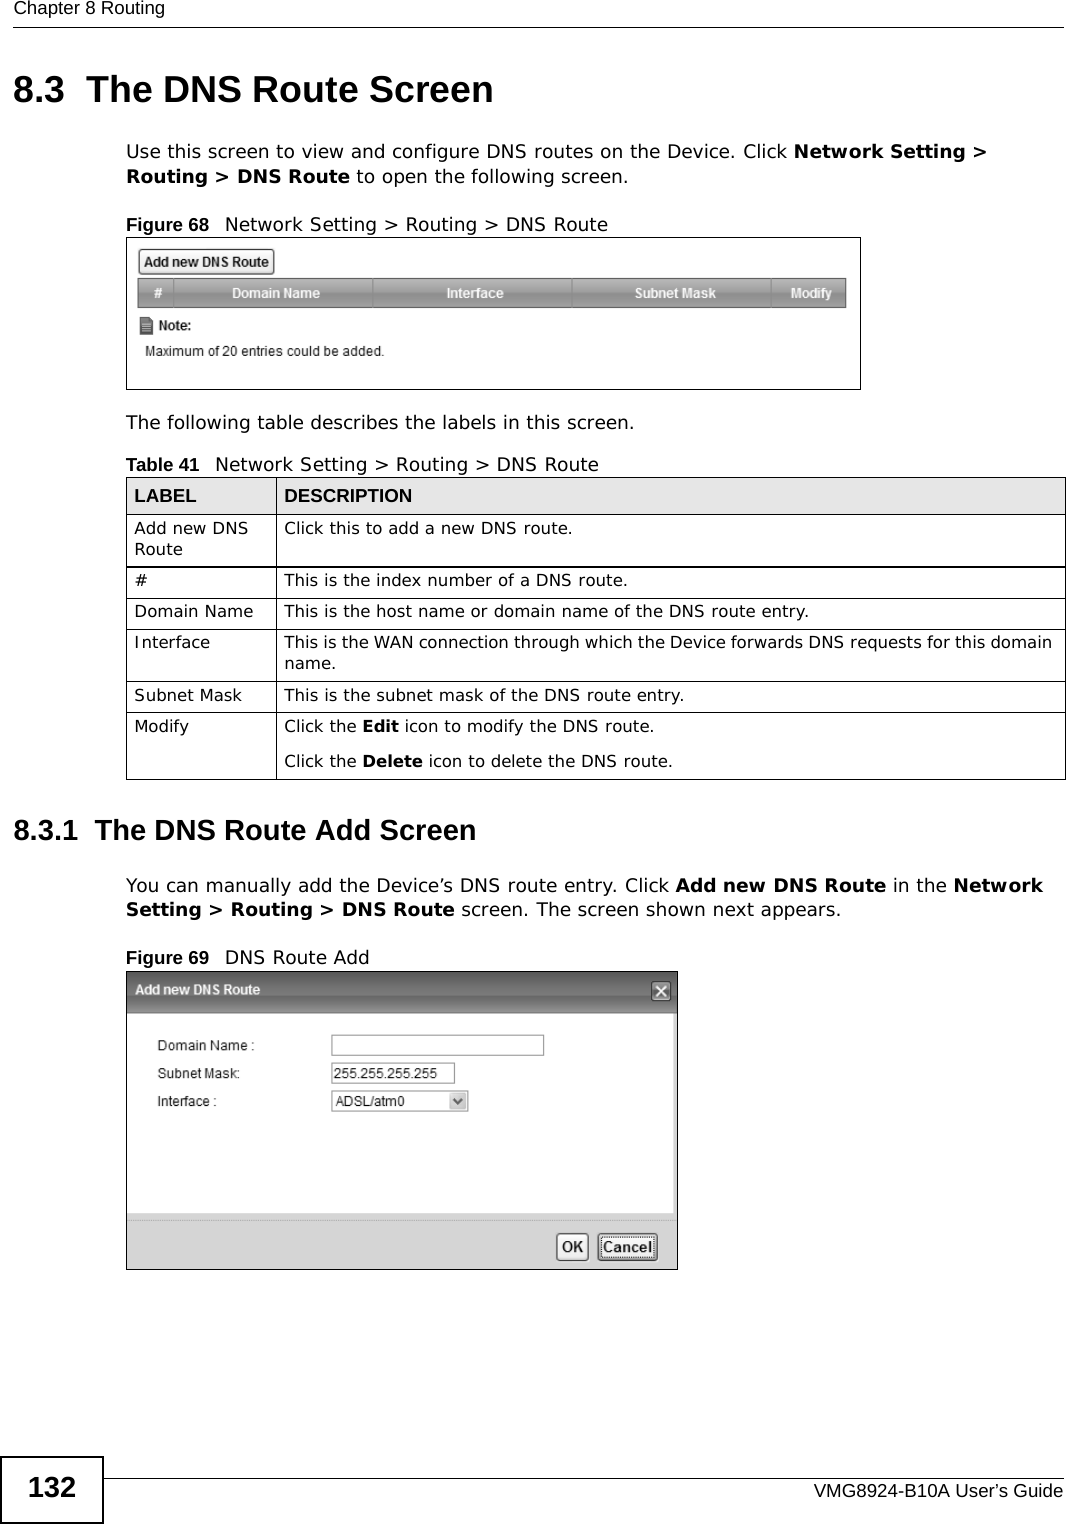 Chapter 8 RoutingVMG8924-B10A User’s Guide1328.3  The DNS Route ScreenUse this screen to view and configure DNS routes on the Device. Click Network Setting &gt; Routing &gt; DNS Route to open the following screen.Figure 68   Network Setting &gt; Routing &gt; DNS RouteThe following table describes the labels in this screen. 8.3.1  The DNS Route Add ScreenYou can manually add the Device’s DNS route entry. Click Add new DNS Route in the Network Setting &gt; Routing &gt; DNS Route screen. The screen shown next appears.Figure 69   DNS Route AddTable 41   Network Setting &gt; Routing &gt; DNS RouteLABEL DESCRIPTIONAdd new DNS Route Click this to add a new DNS route.#This is the index number of a DNS route.Domain Name This is the host name or domain name of the DNS route entry.Interface This is the WAN connection through which the Device forwards DNS requests for this domain name.Subnet Mask This is the subnet mask of the DNS route entry. Modify Click the Edit icon to modify the DNS route.Click the Delete icon to delete the DNS route.